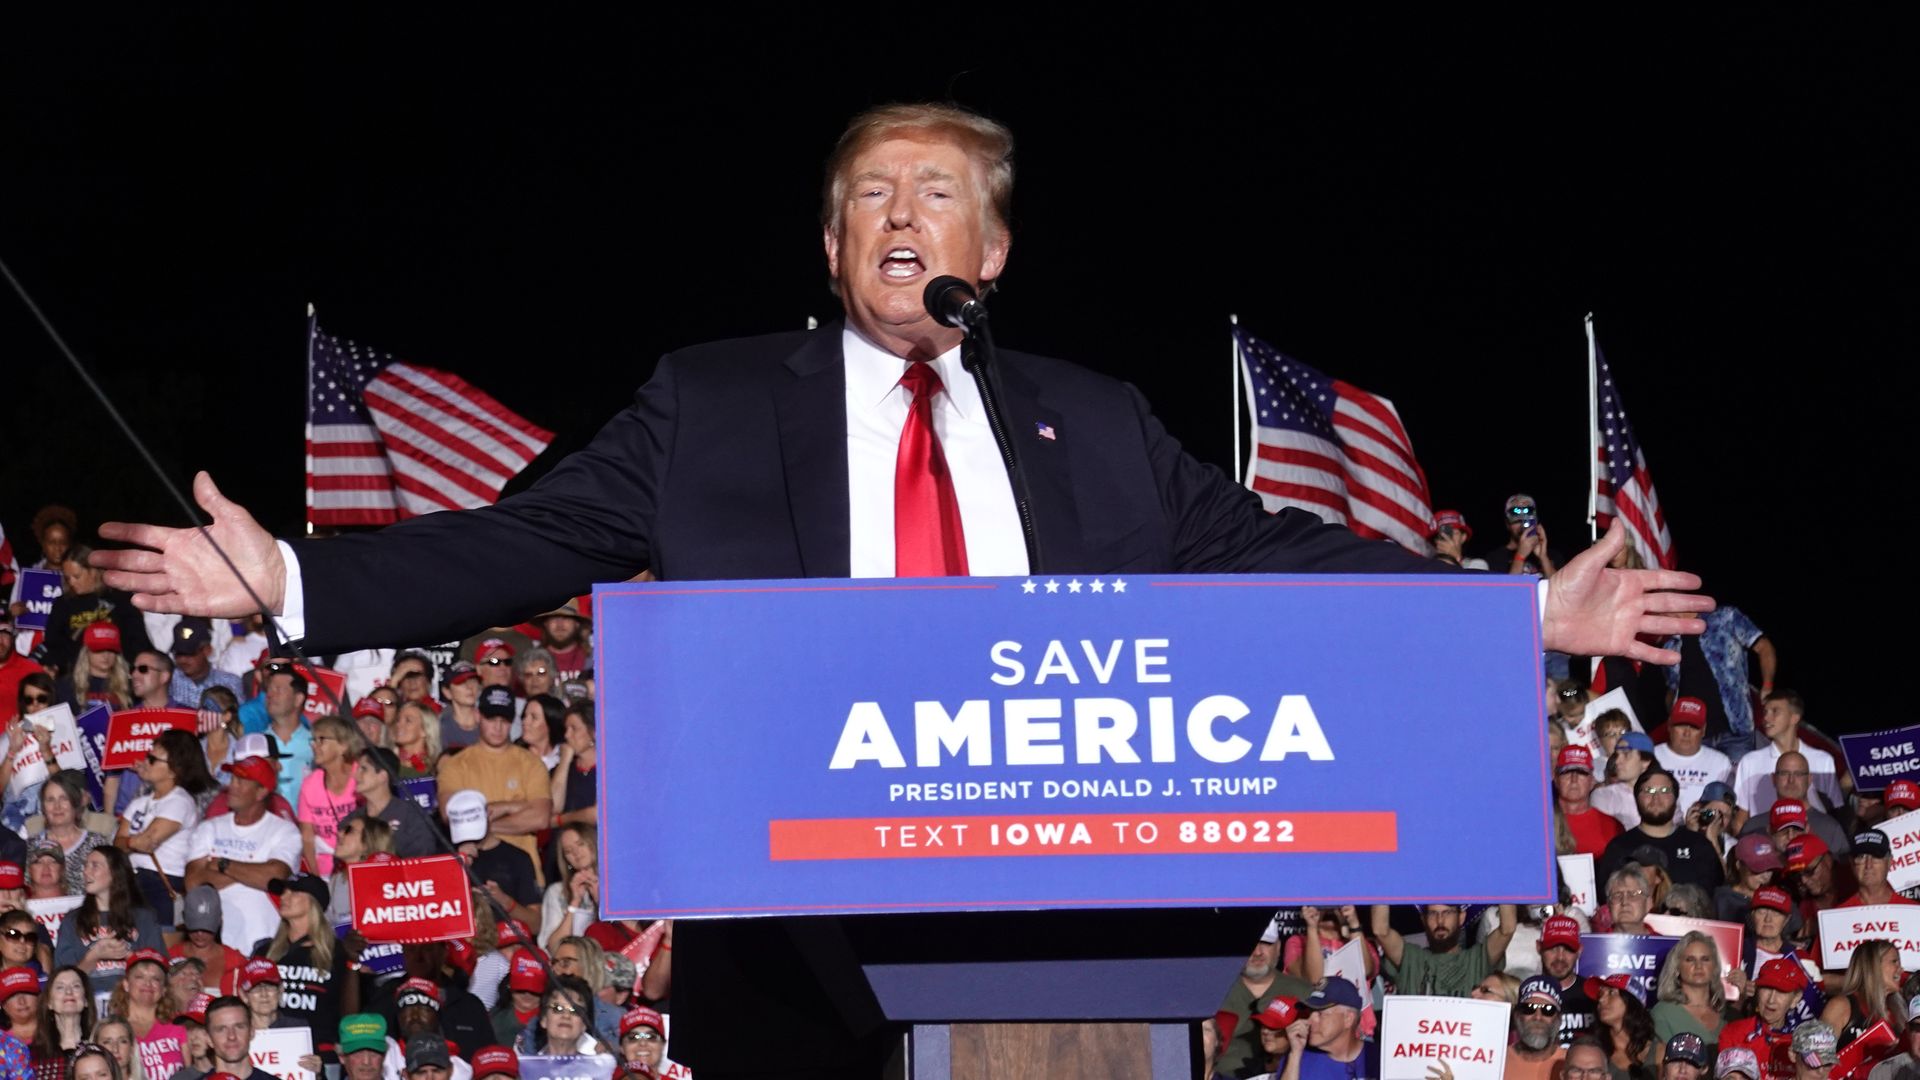  Former President Donald Trump speaks to supporters during a rally at the Iowa State Fairgrounds on October 09, 2021 in Des Moines, Iowa. 